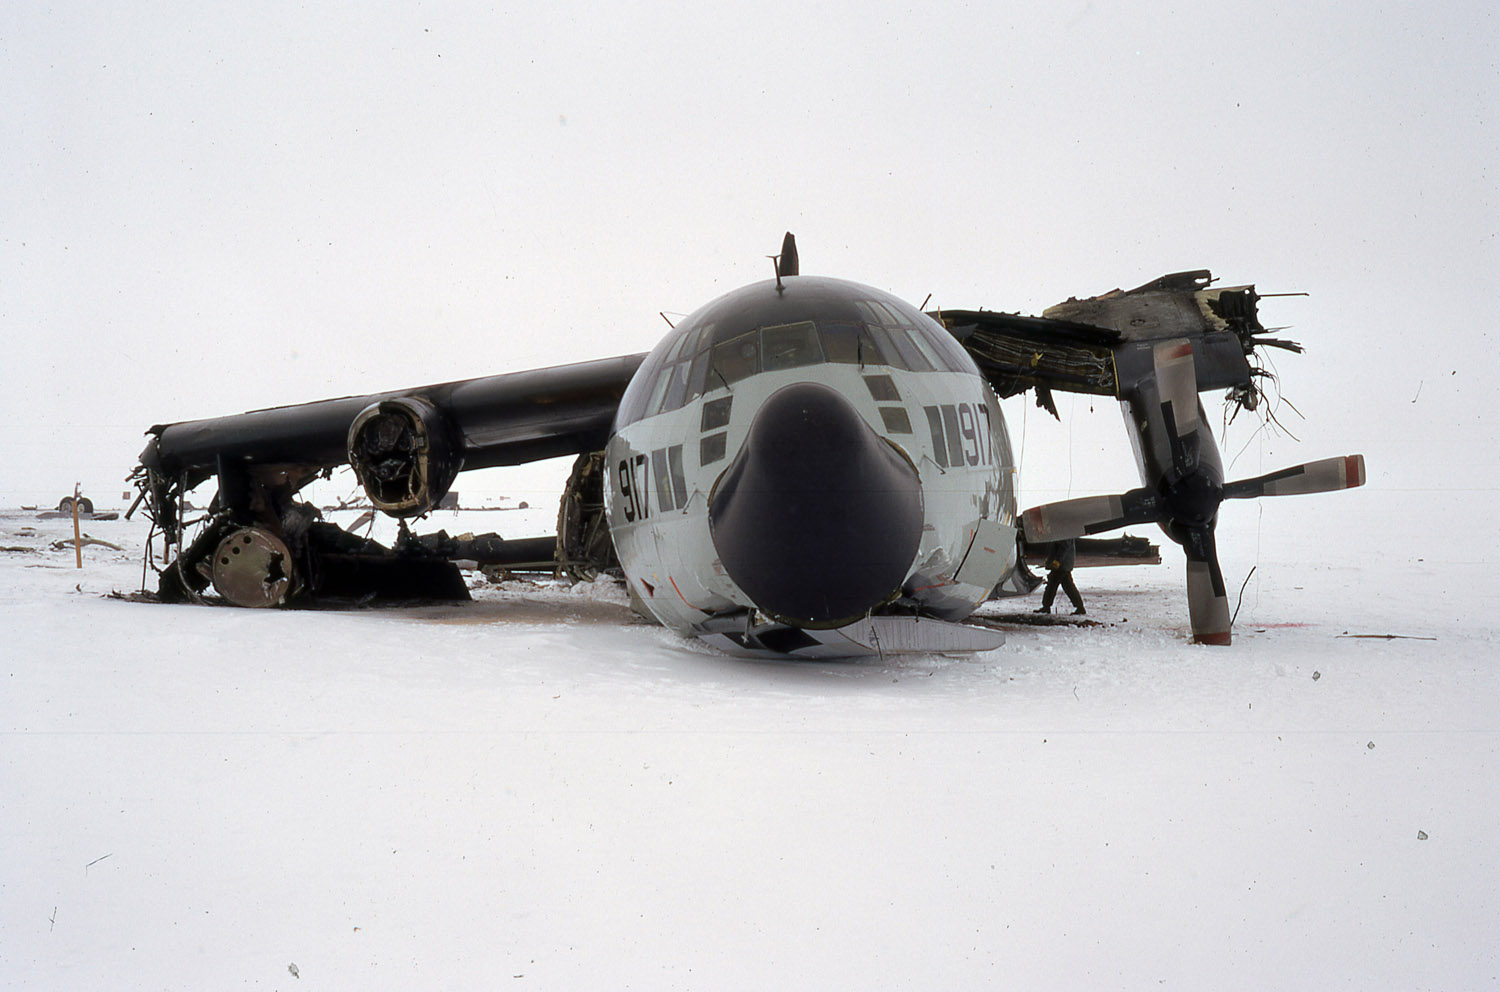 Antarctica Aircraft - Accident at South Pole Station - 2